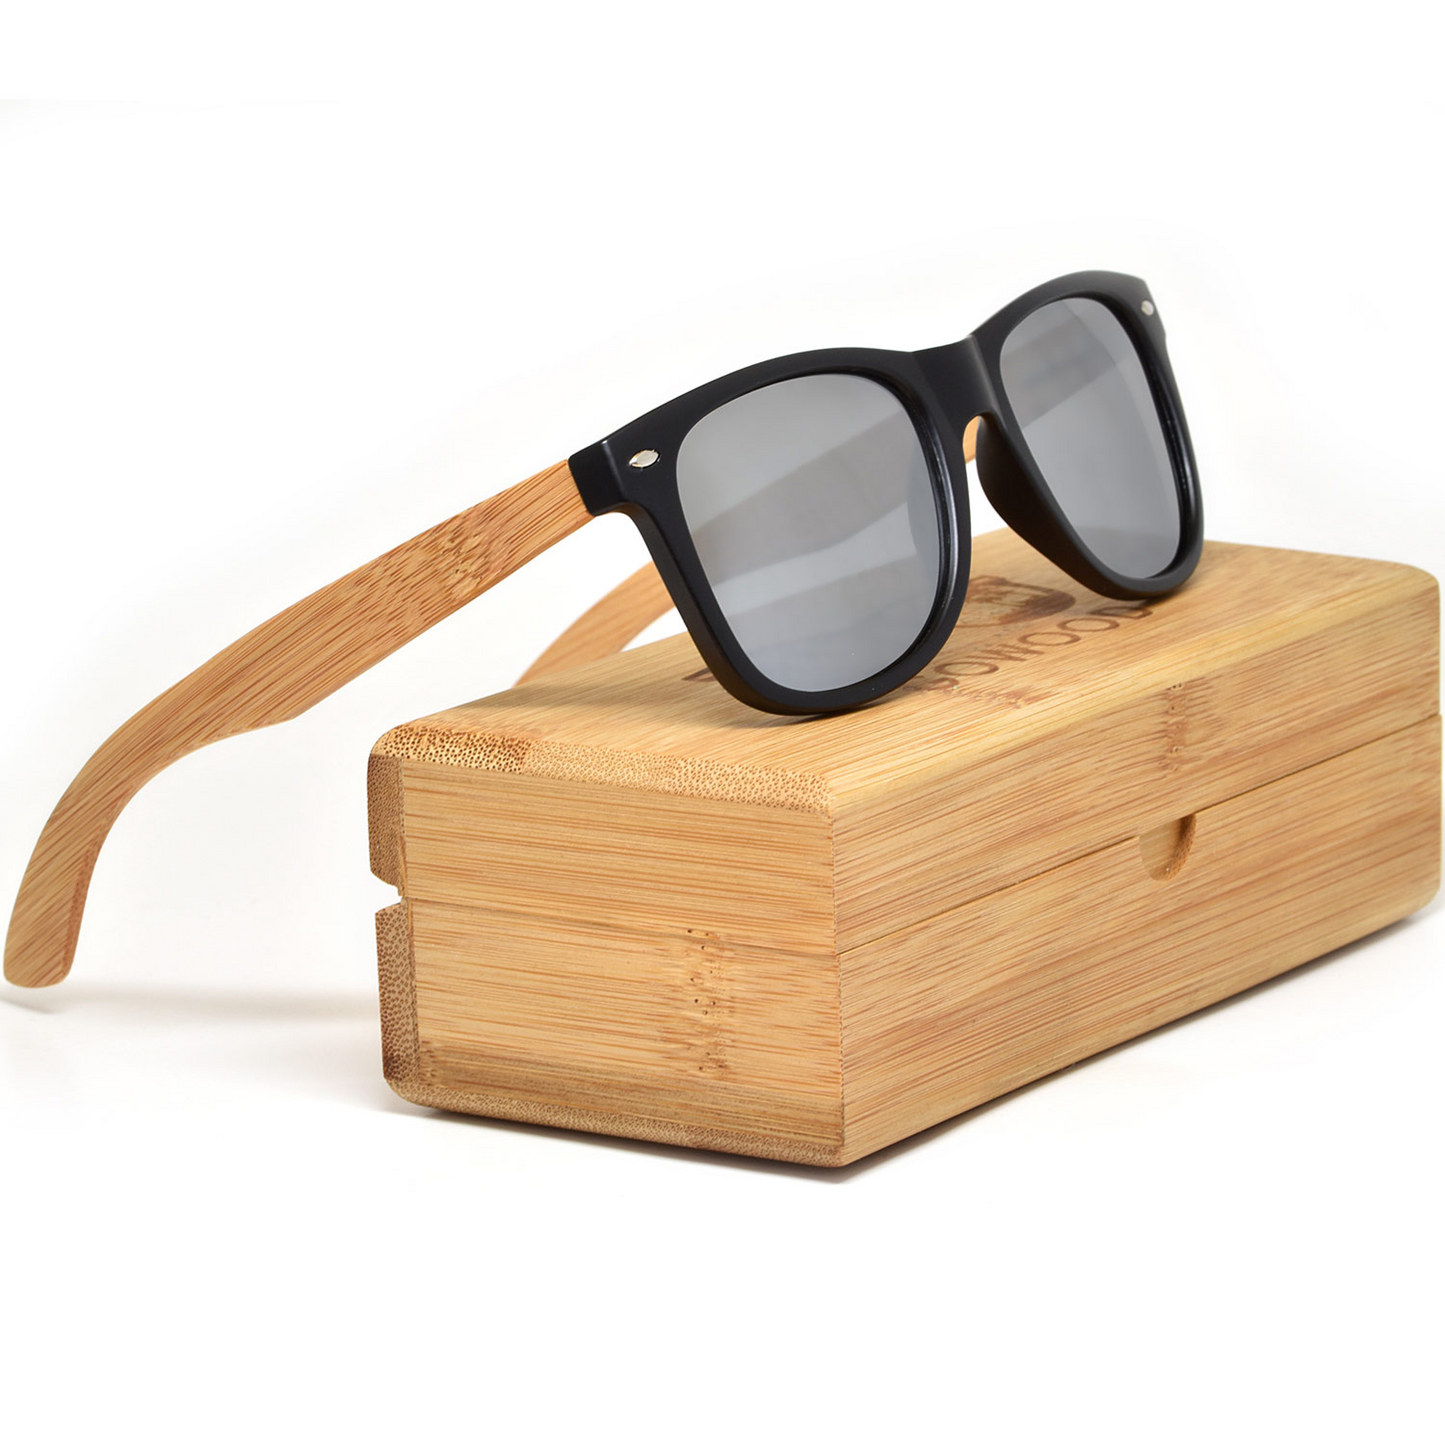 Bamboo wood classic style sunglasses with silver mirrored polarized lenses